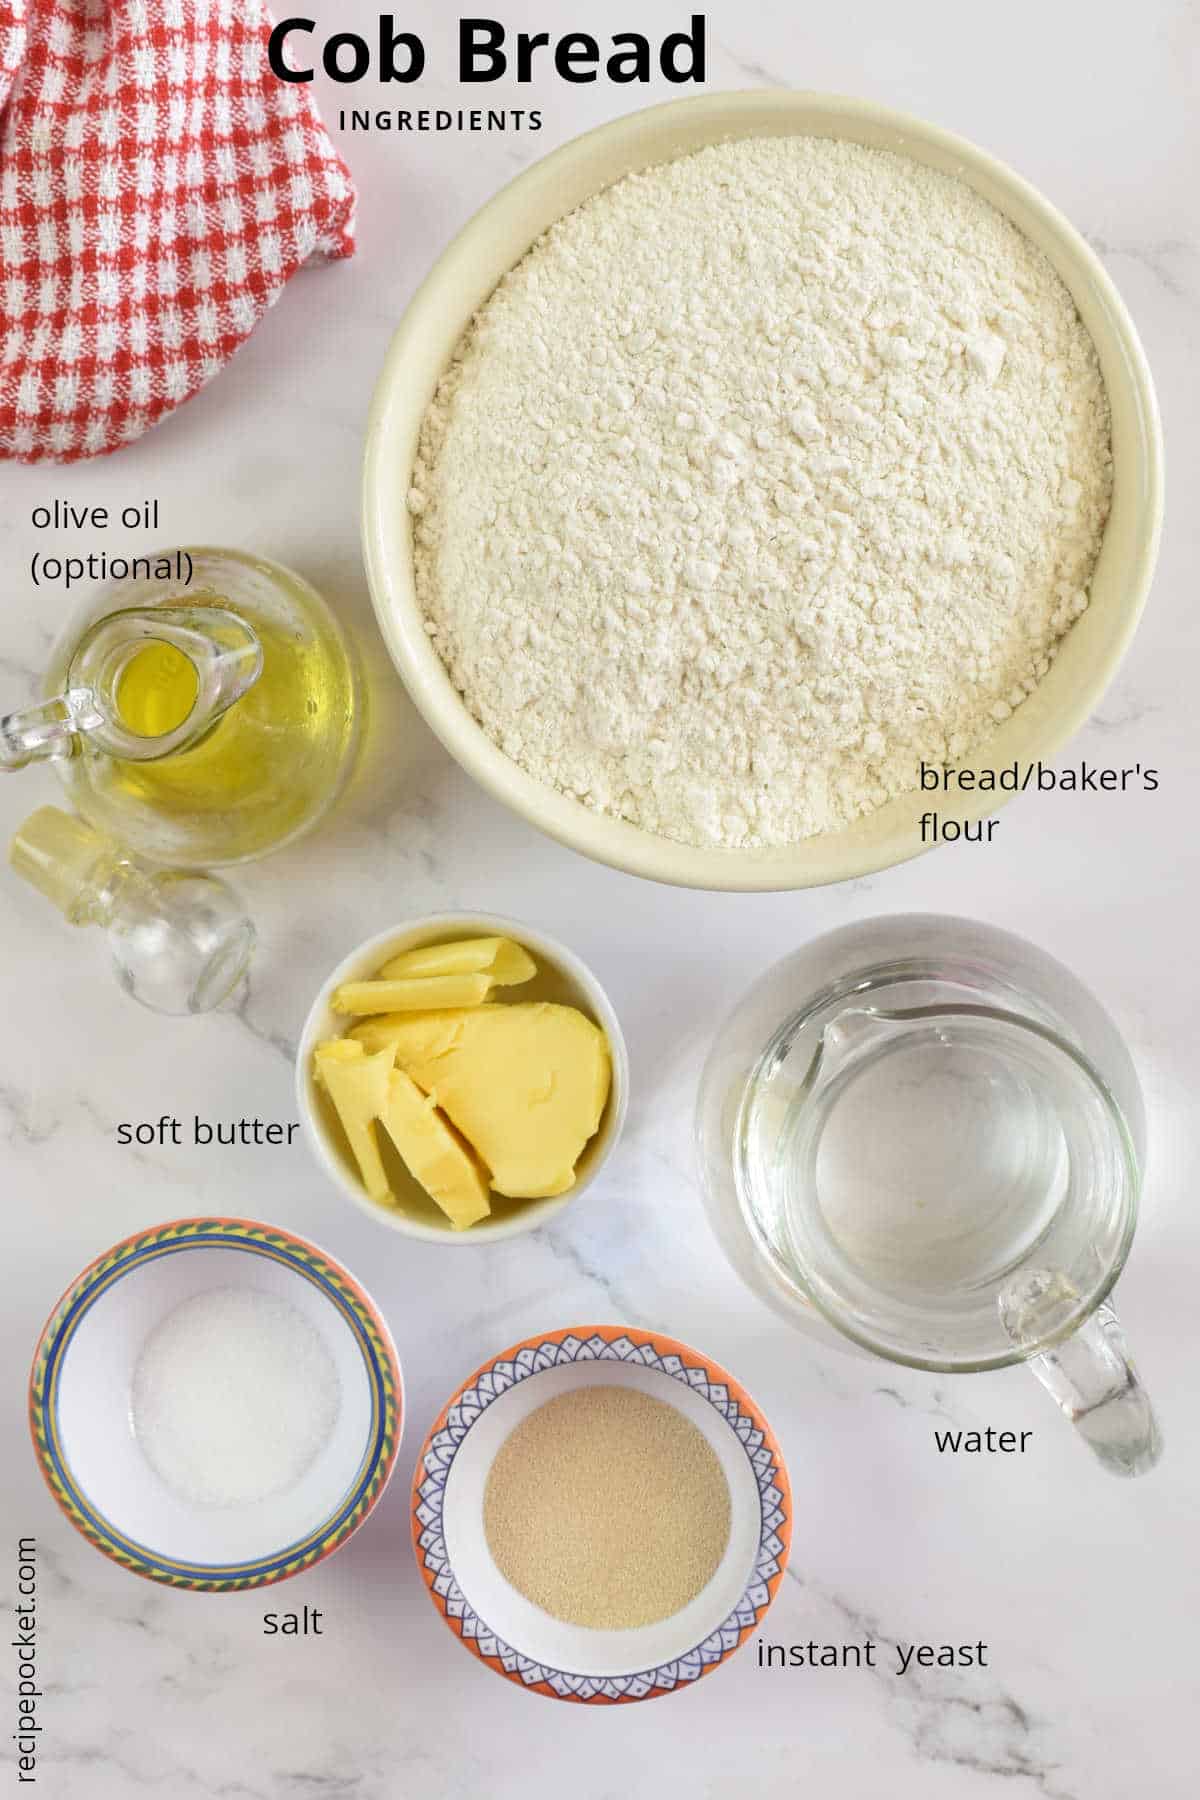 Top down view of ingredients for making cob bread.